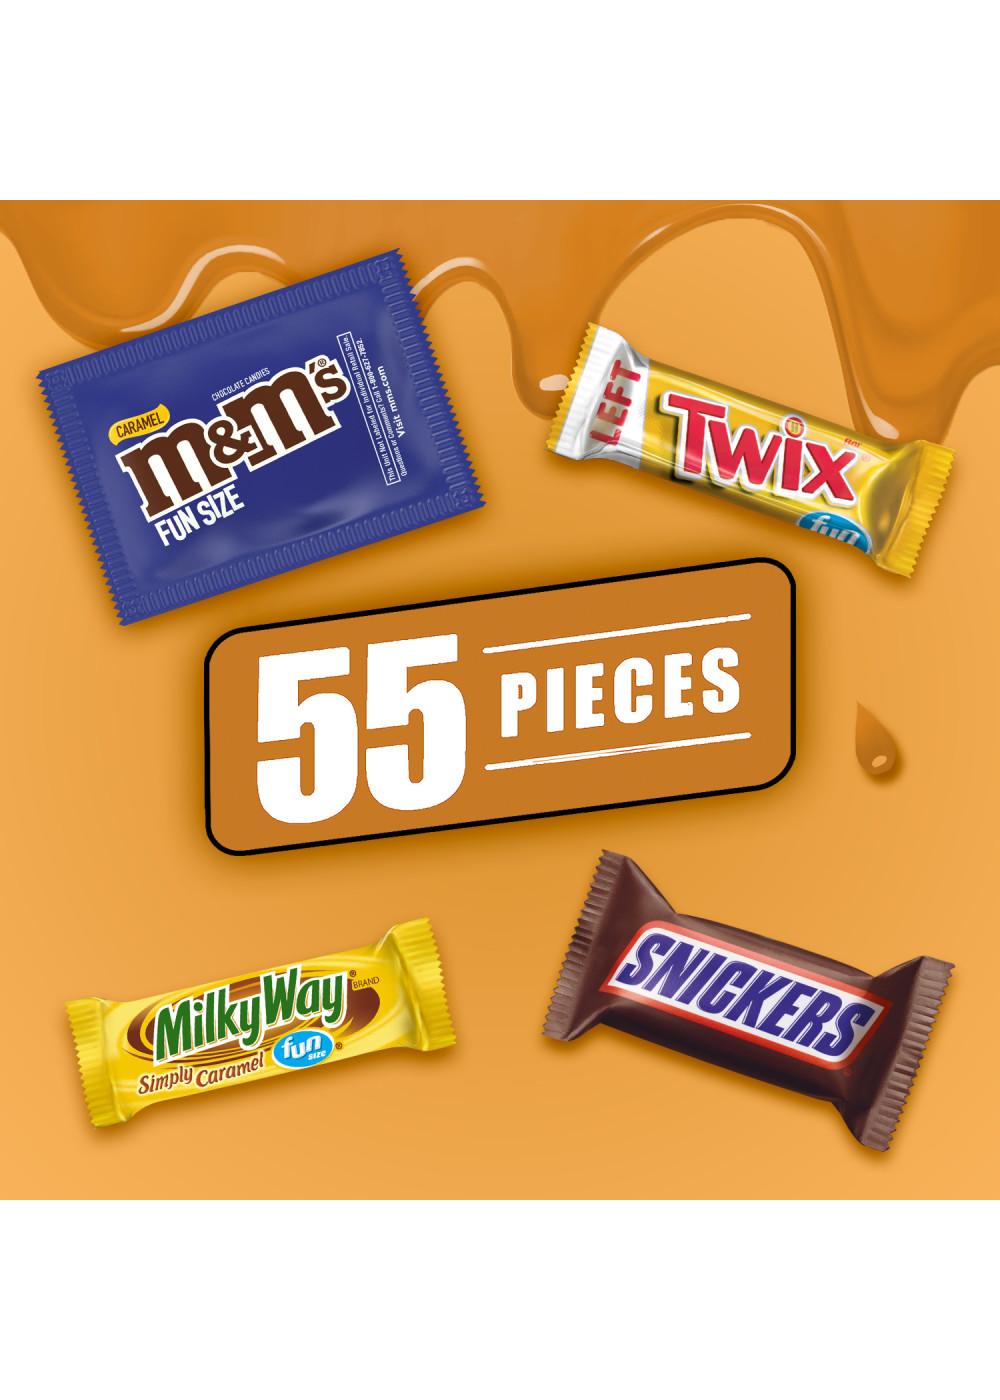 M&M's, Snickers & Twix Variety Pack Chocolate Candy Bars - 55 Pieces 